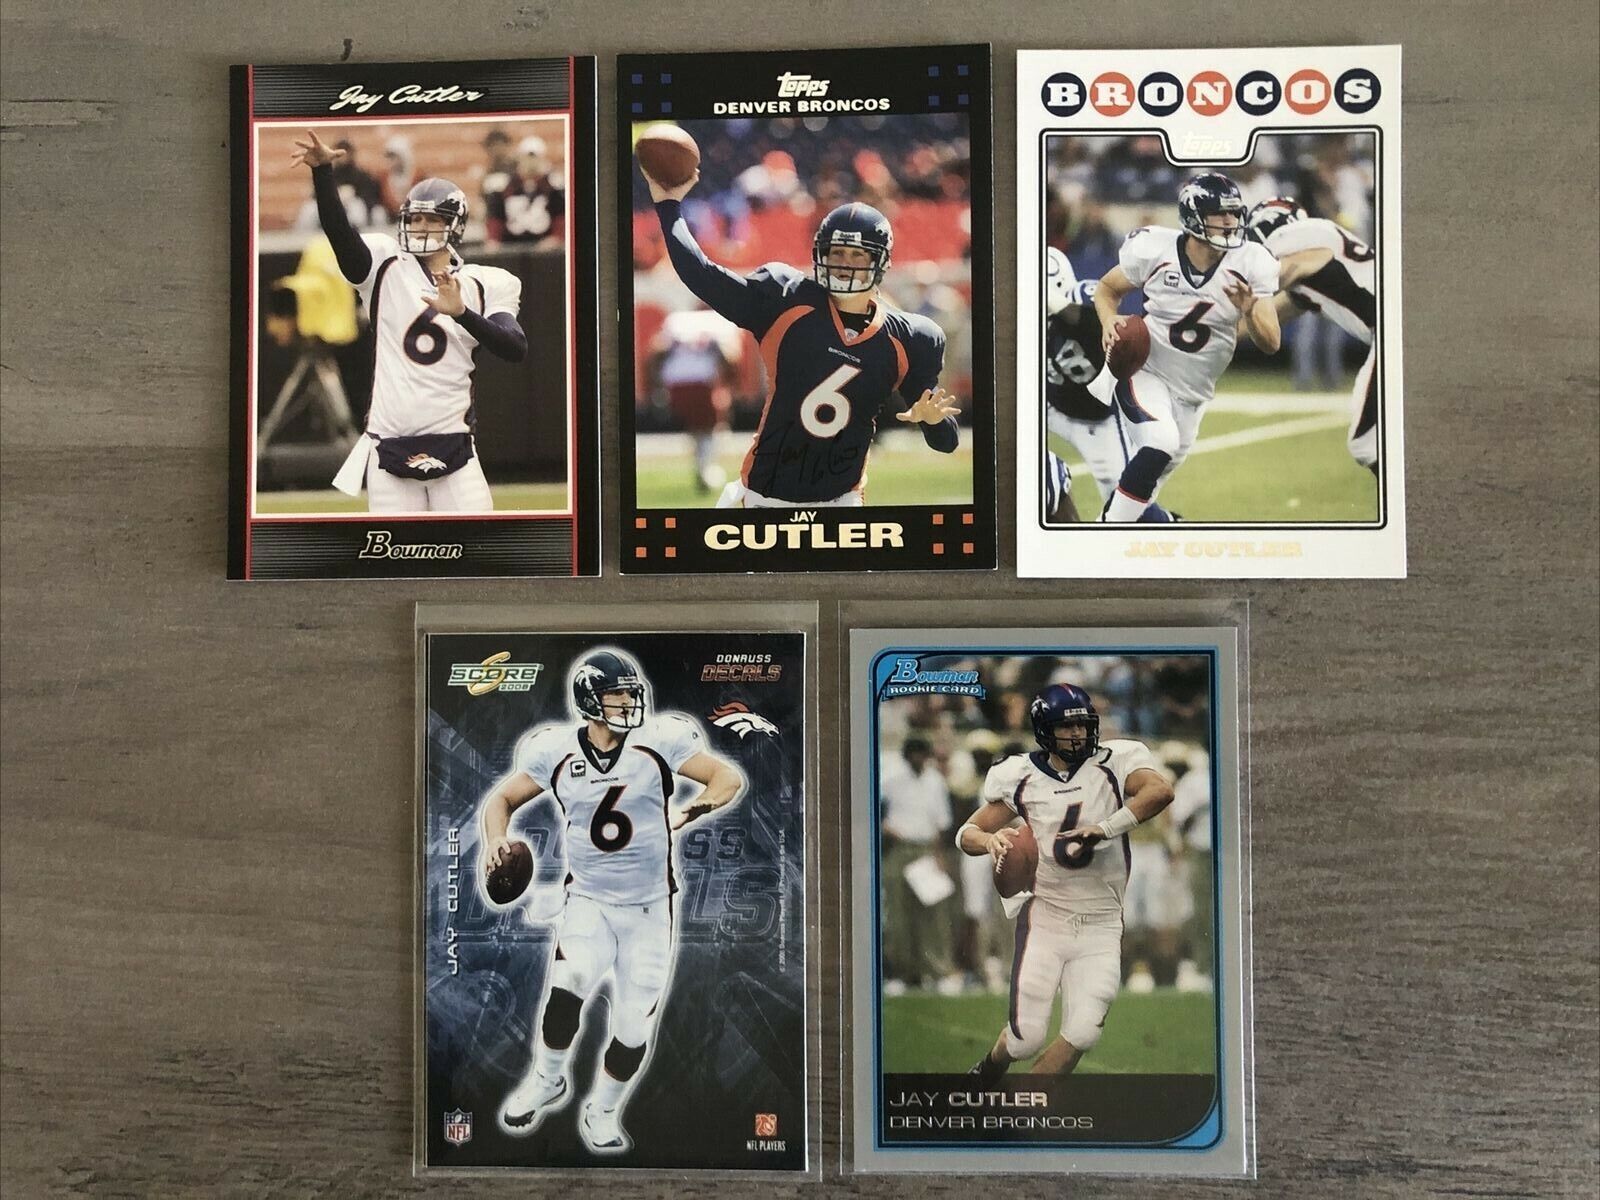 Jay Cutler 5 Card Lot. Assorted Player, Sticker & Rookie Cards. Denver Broncos. rookie card picture